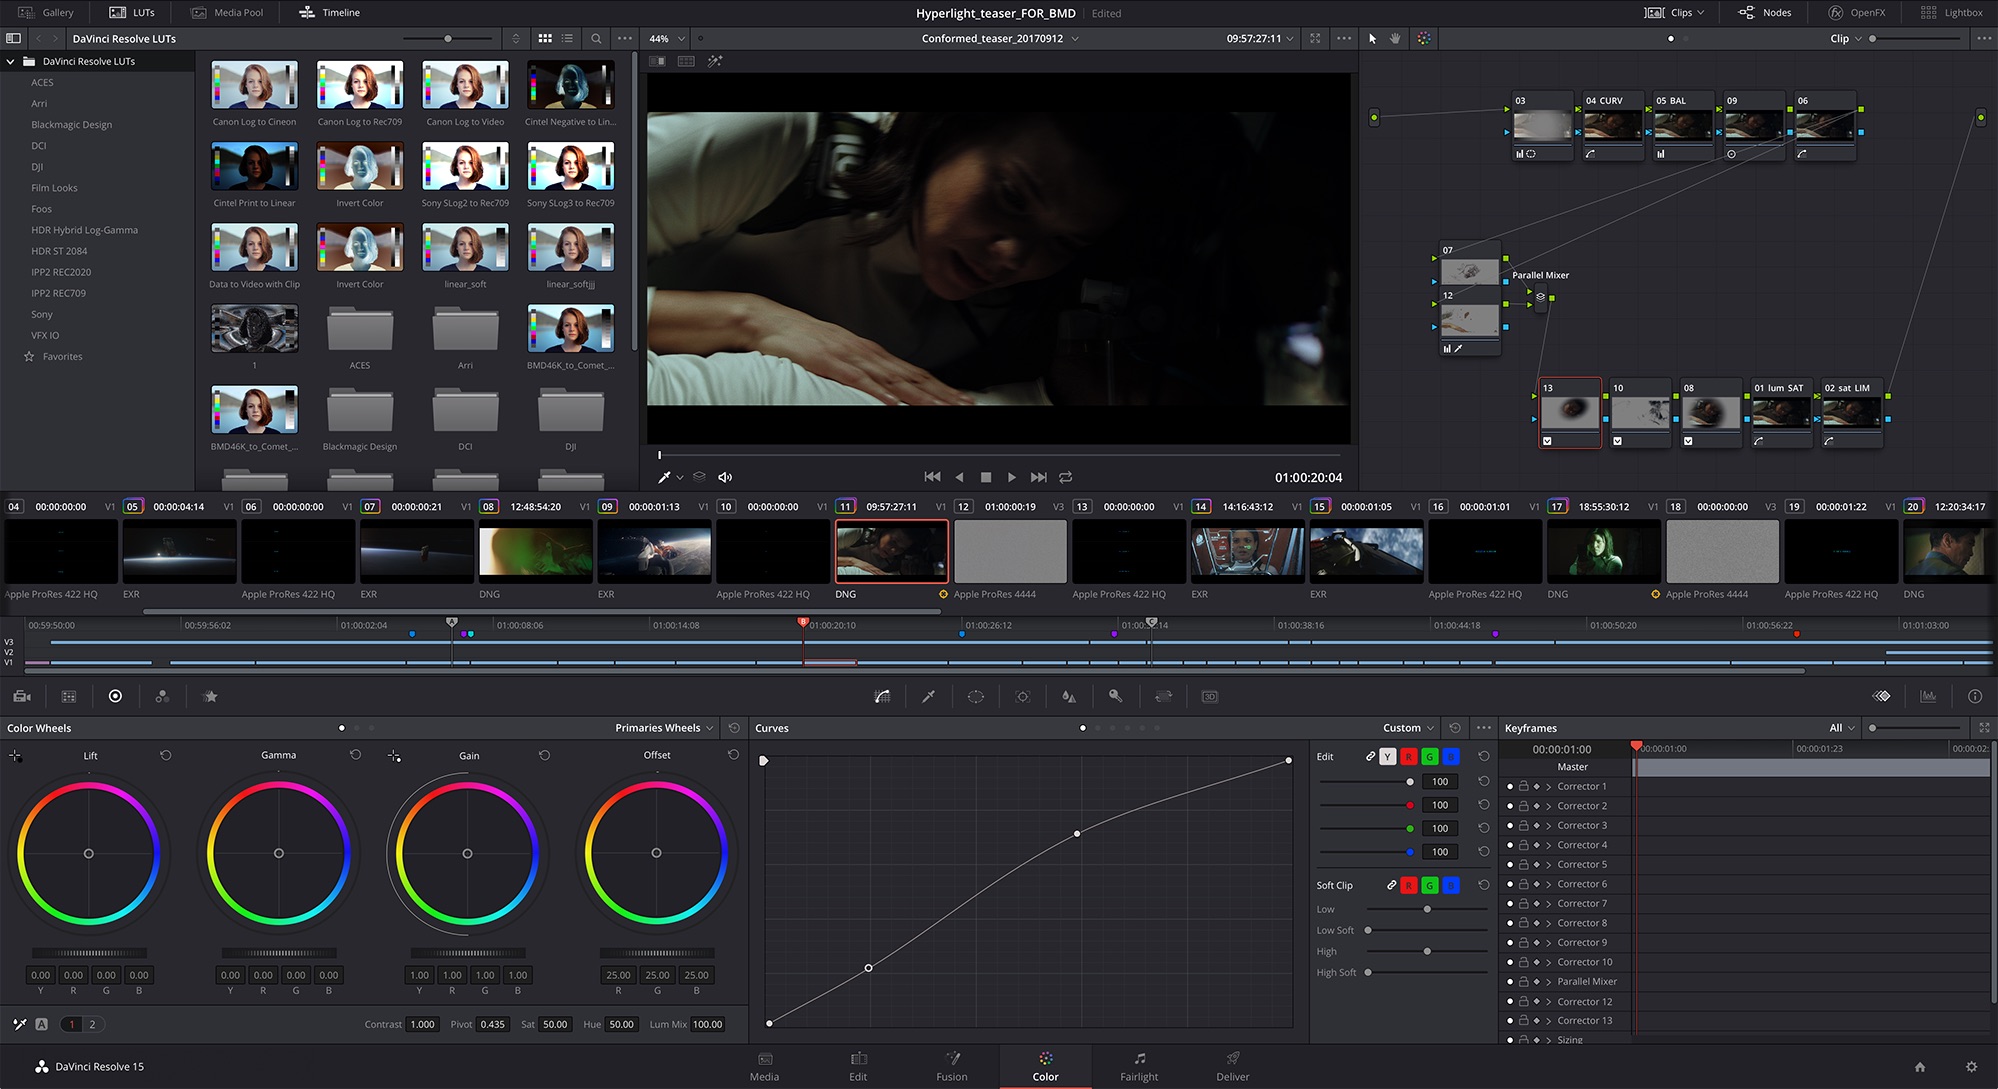 davinci resolve support what type of input media